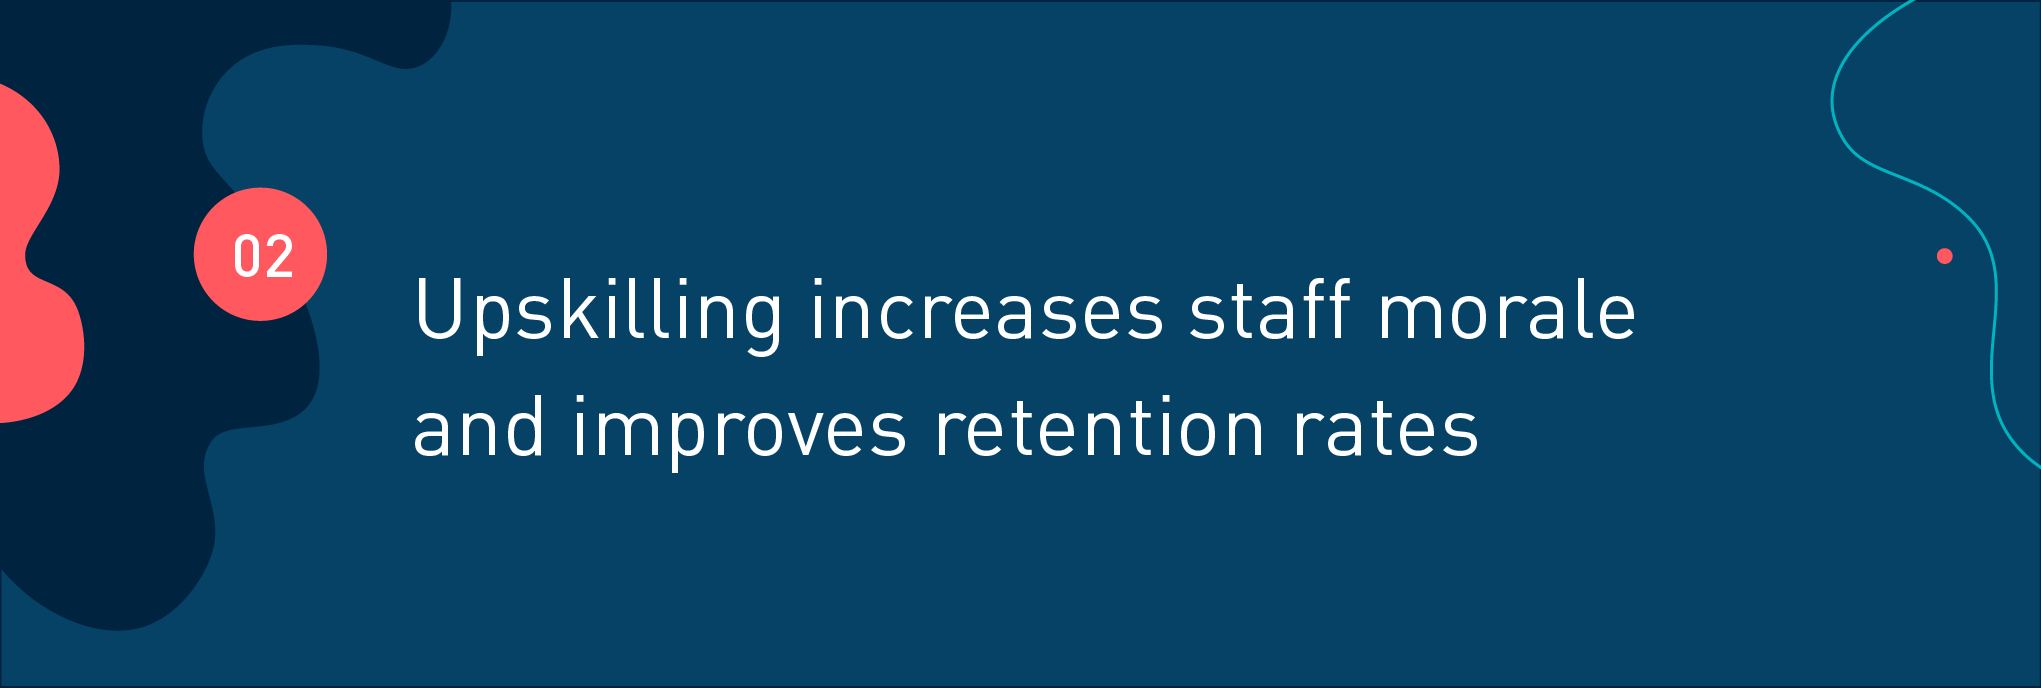 Upskilling increases staff morale and improves retention rates